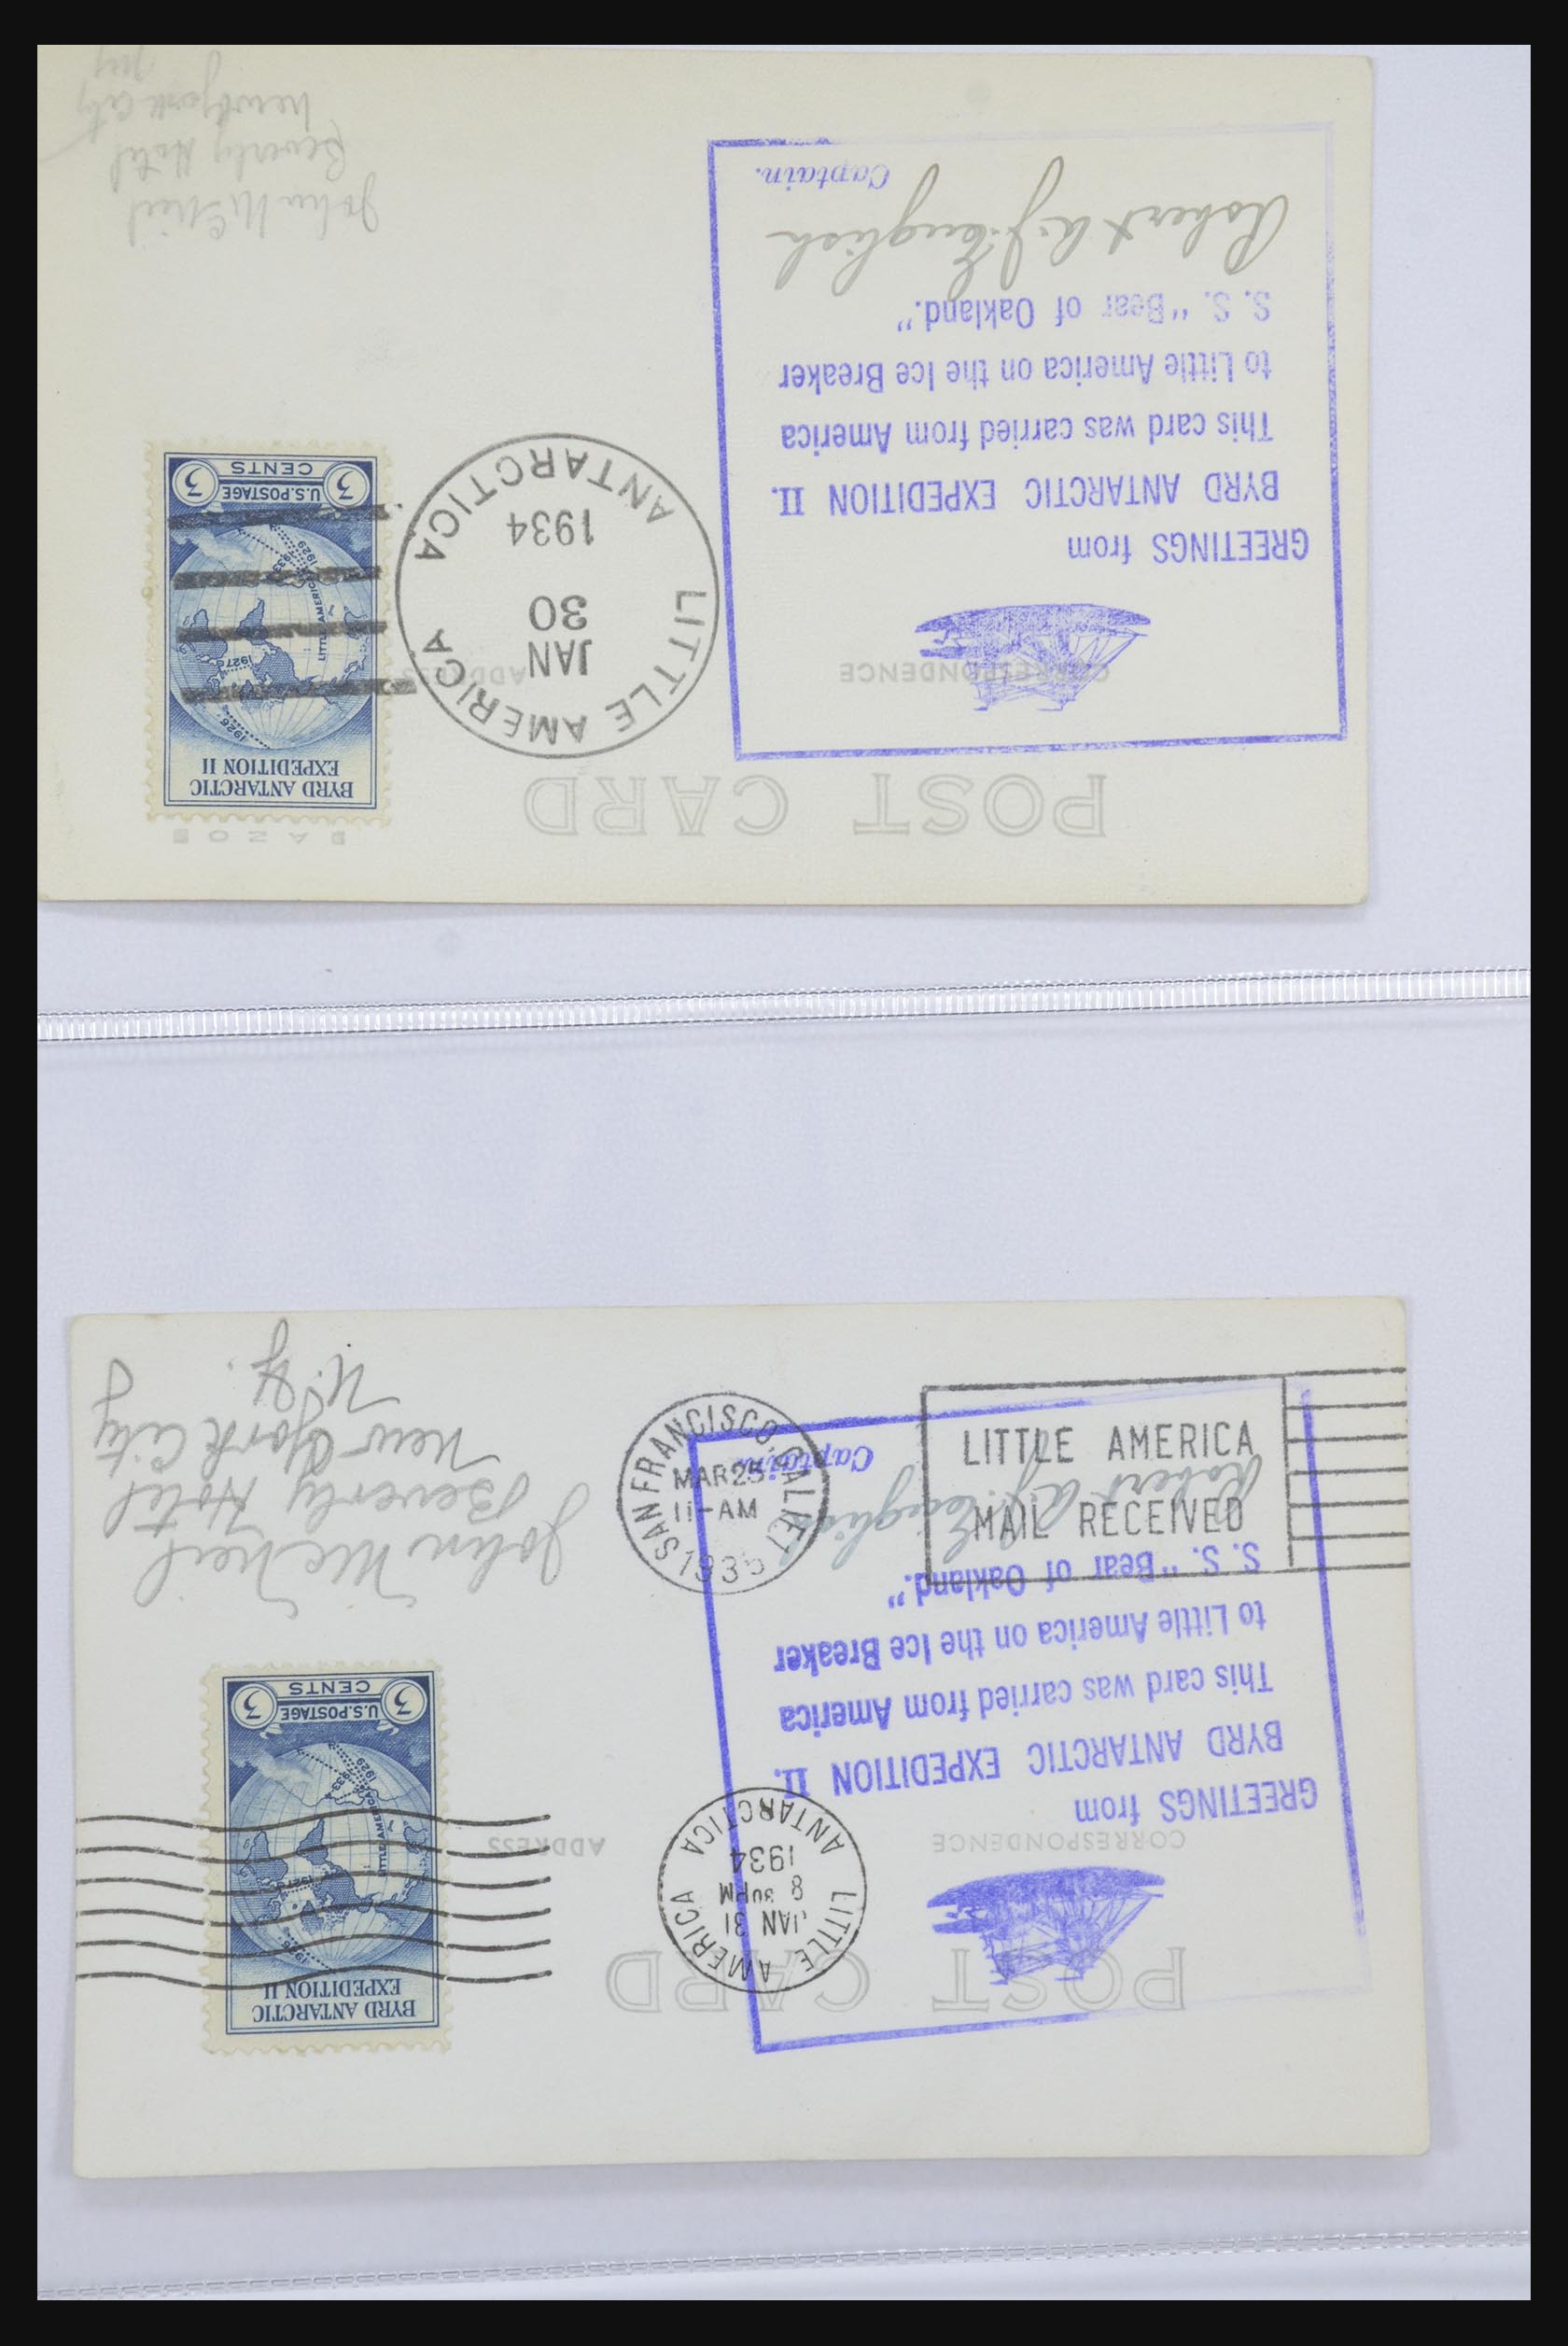 31627 018 - 31627 Byrd Antarctic Expedition 1934.